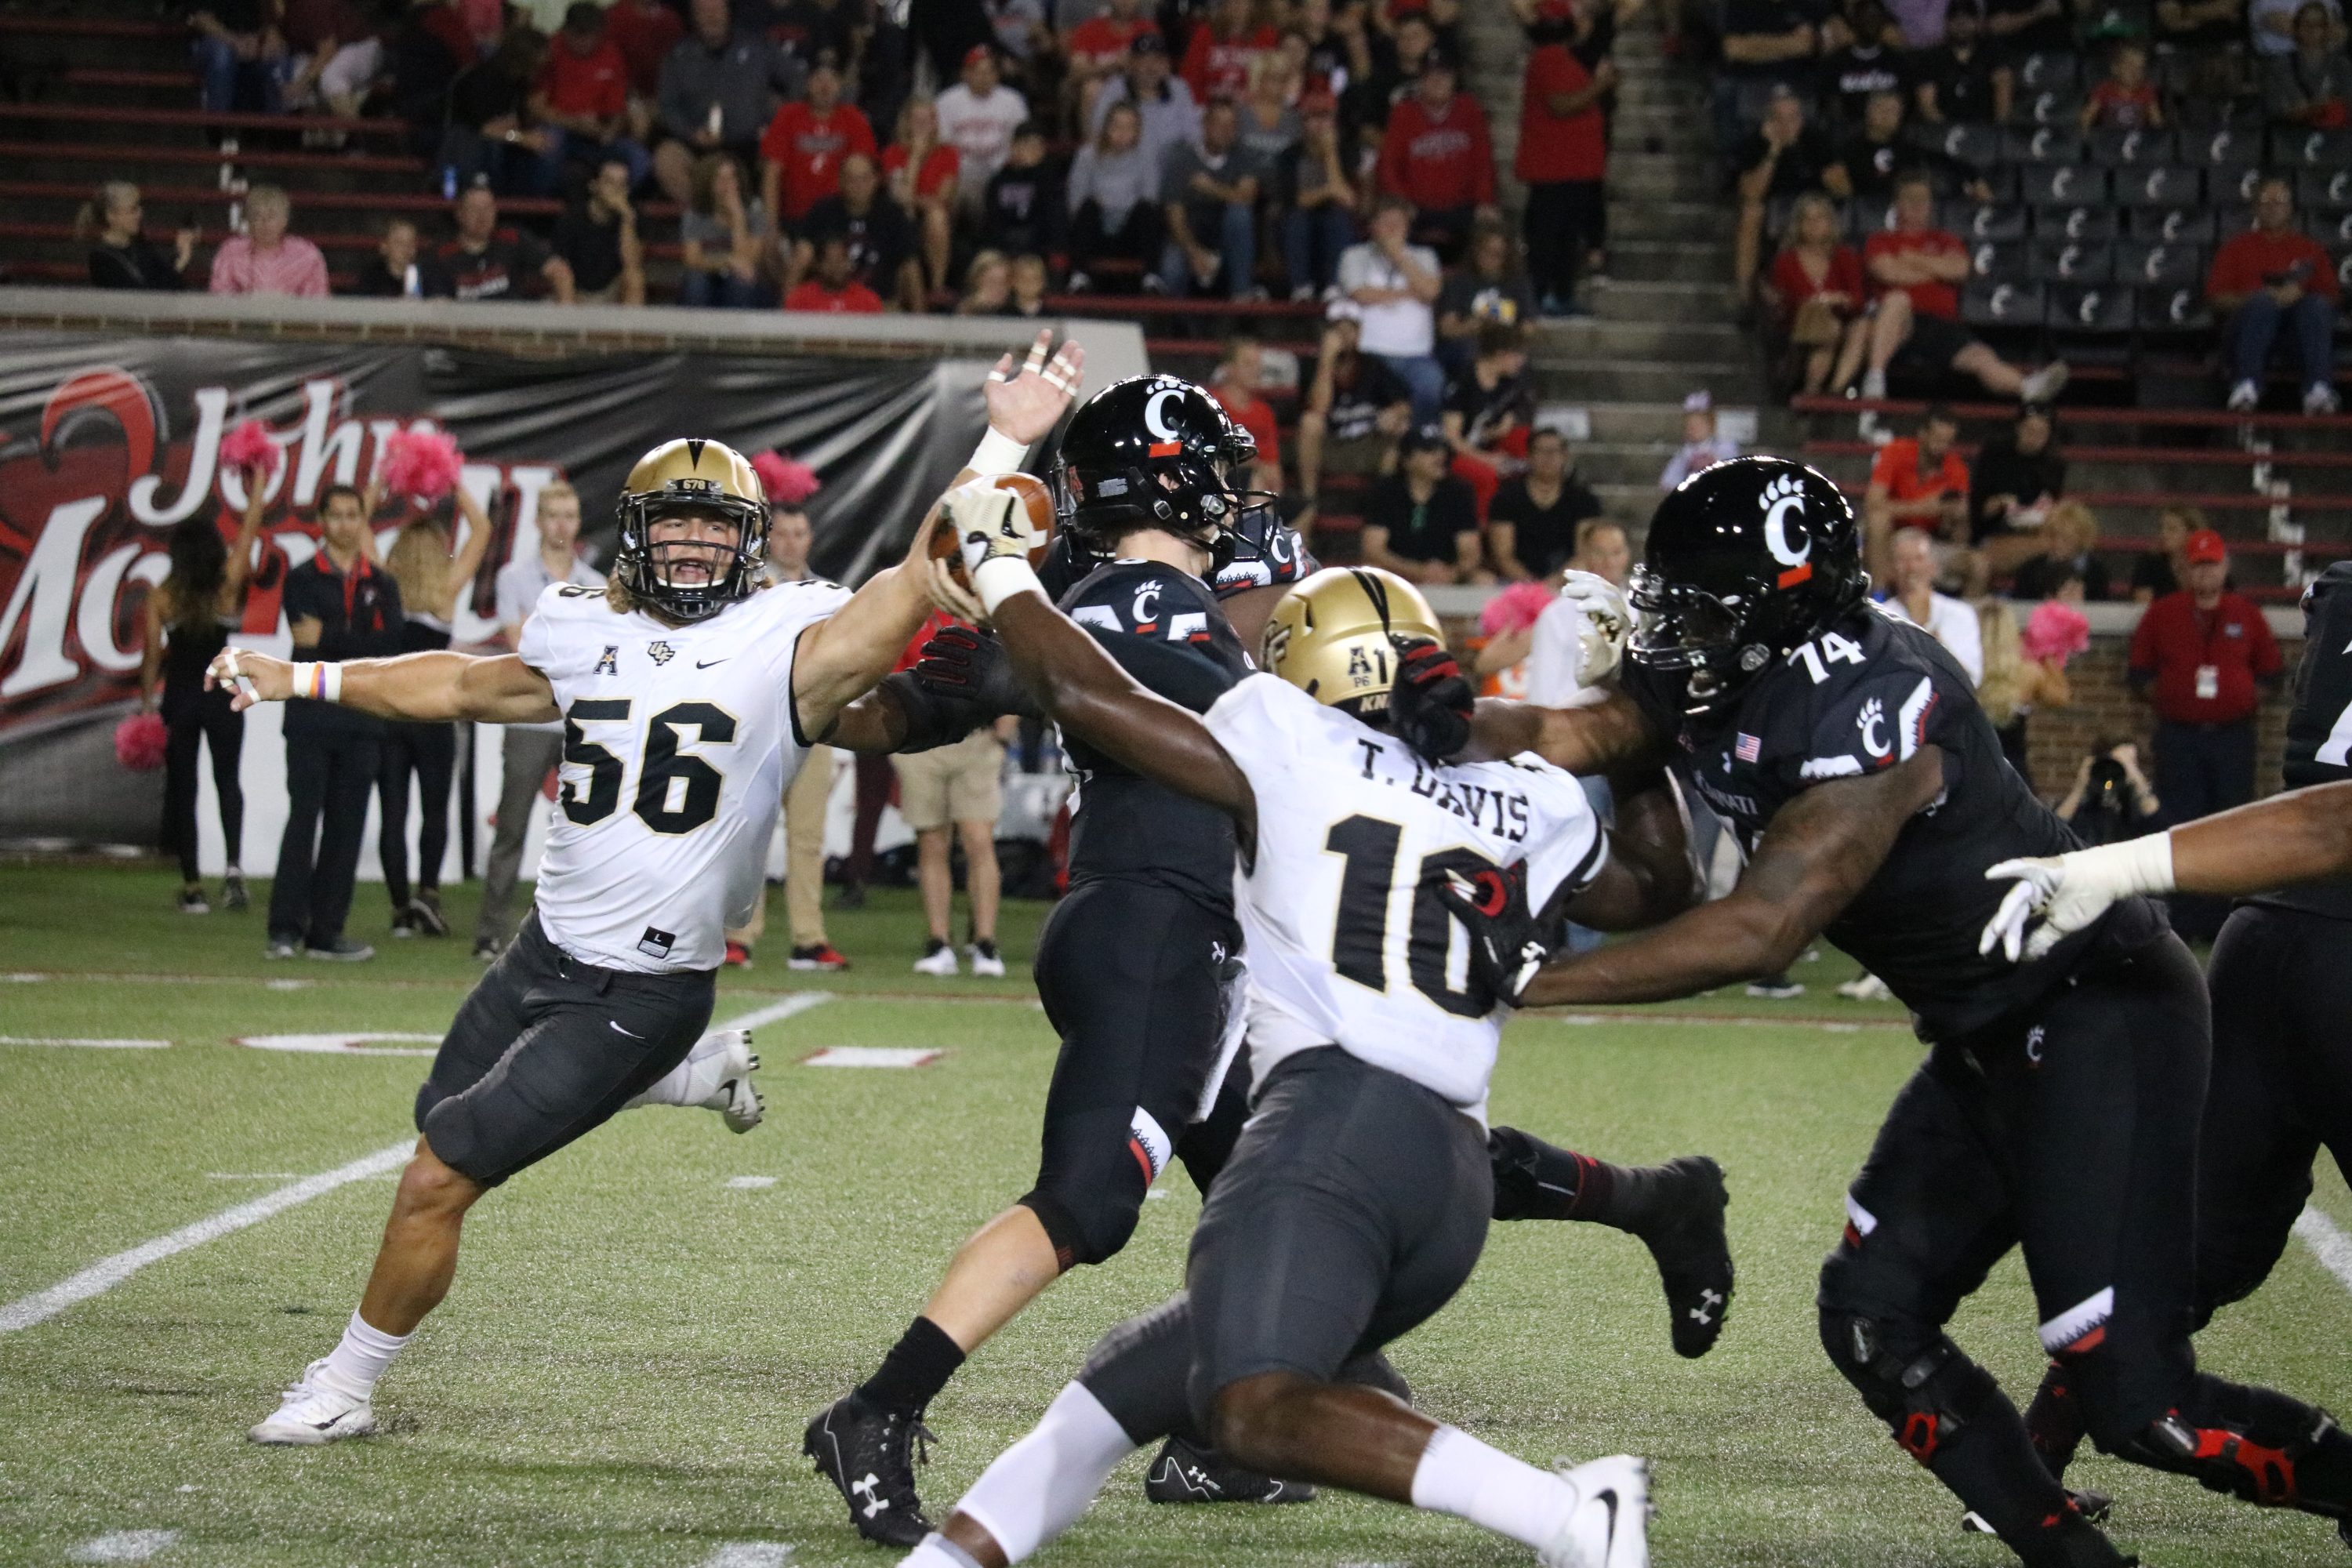 It was a record night for UCF A look at Saturday’s career benchmarks